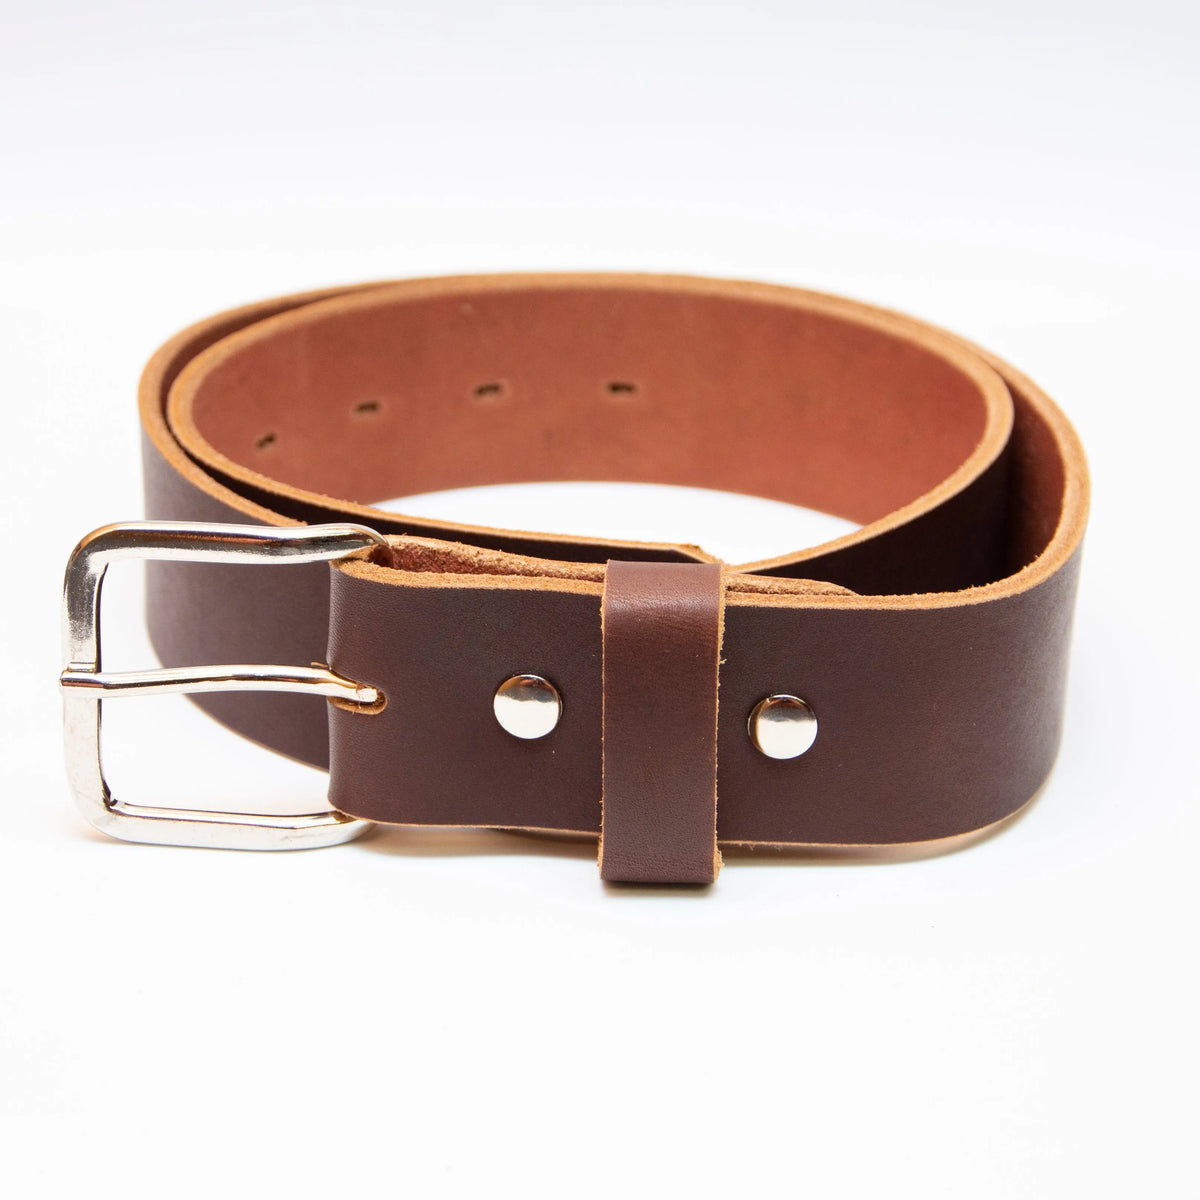 The Journeyman Leather Belt - All American Clothing Co